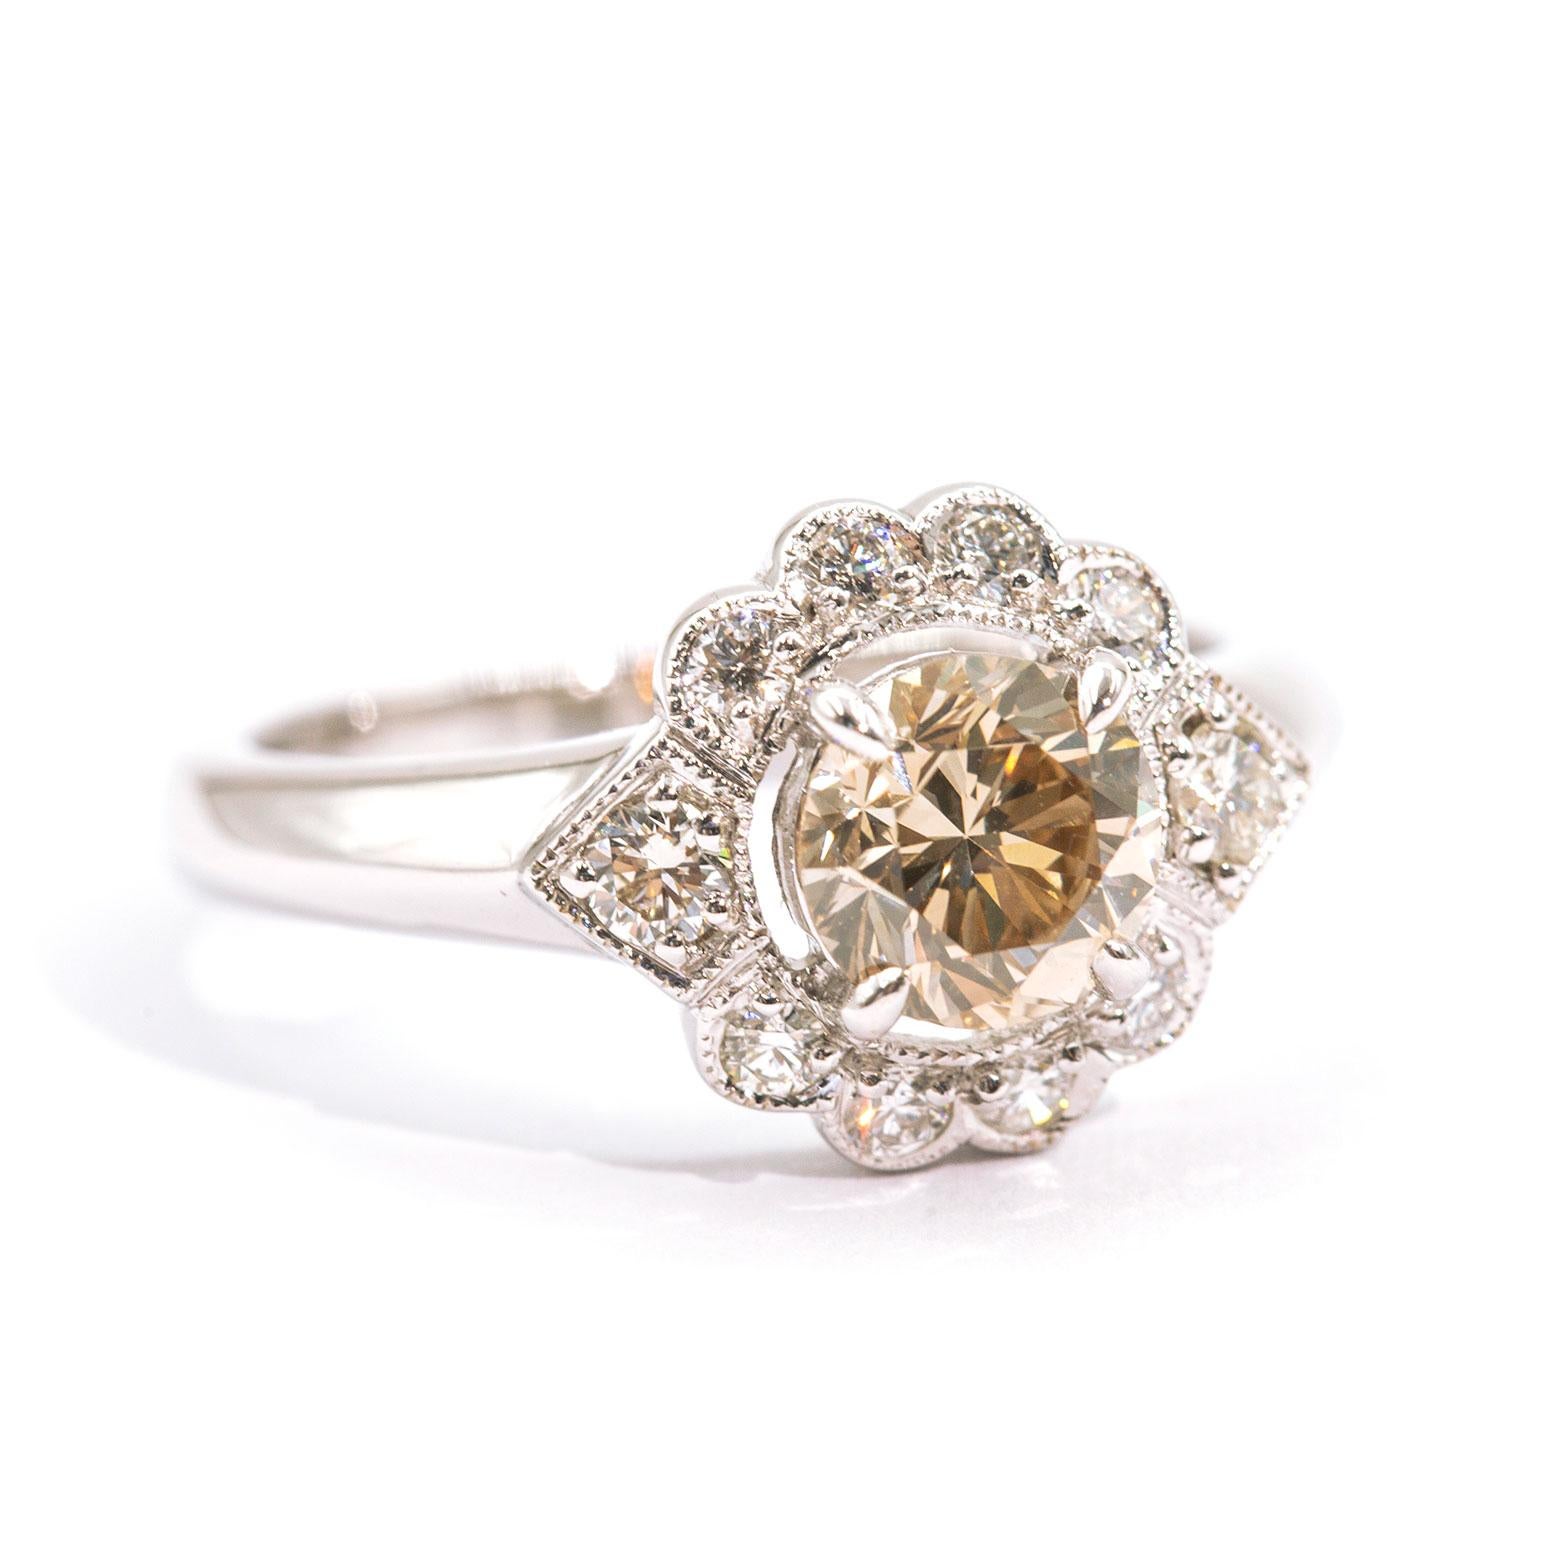 Forged in 18 carat white gold, this vintage inspired halo cluster ring features a high polish flat edge band with a sparkling centrepiece 1.03 carat ADGL certified round brilliant cut champagne diamond surrounded by a glittering border of shimmering